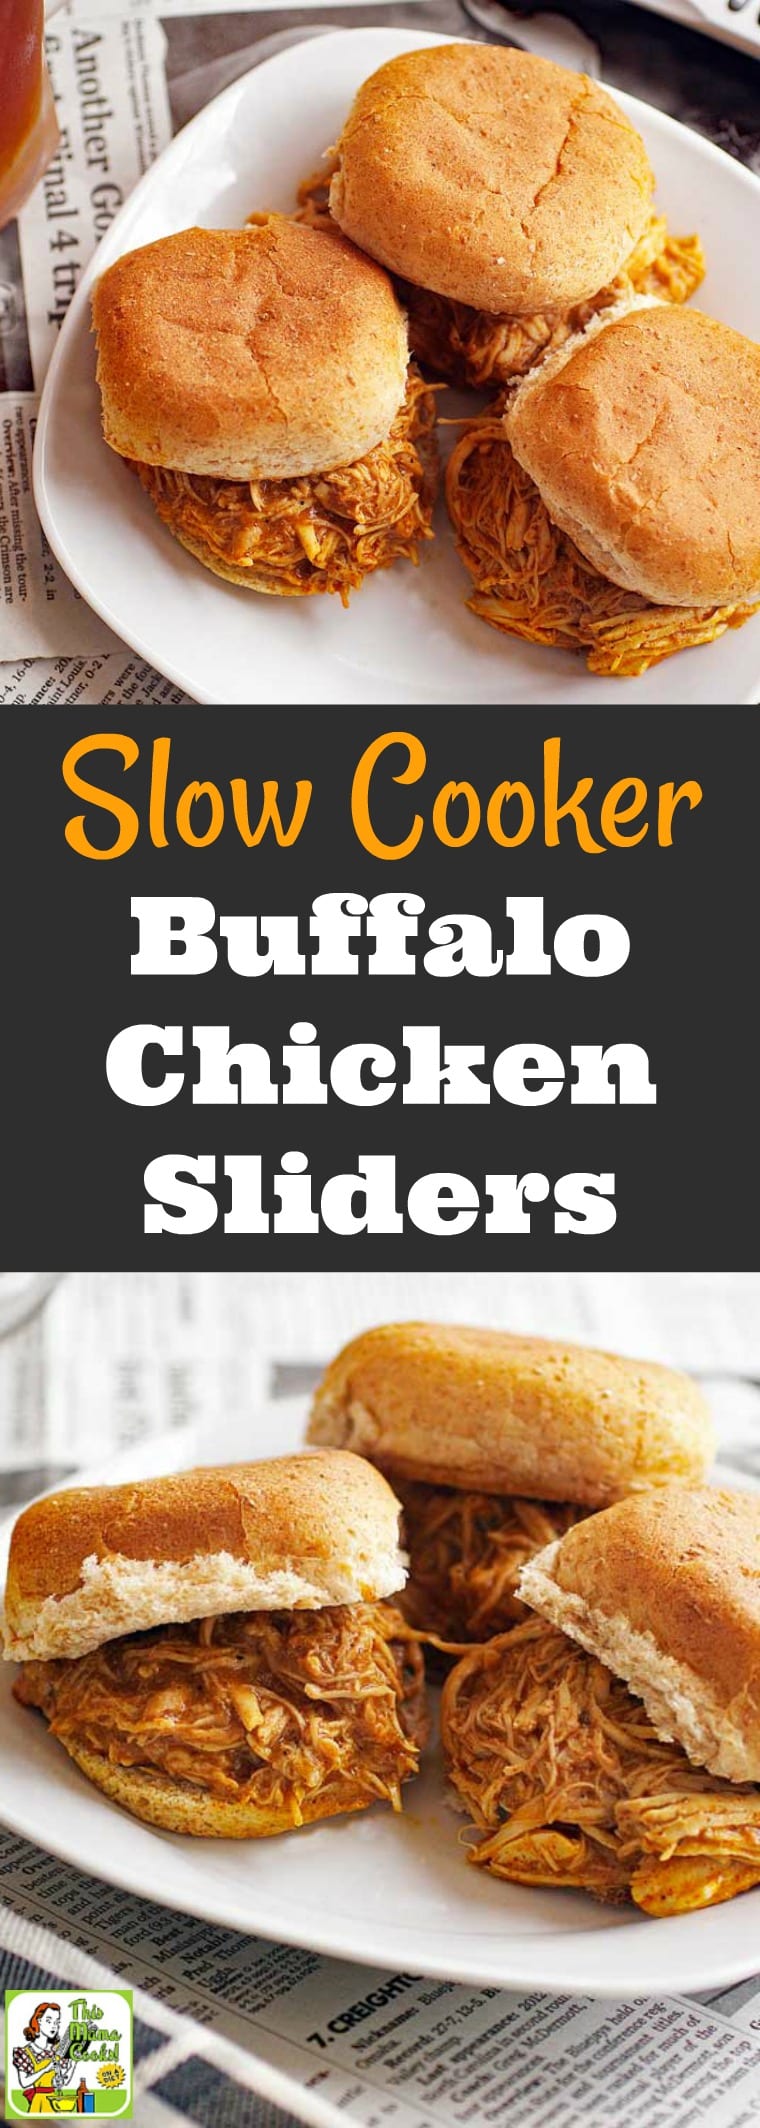 Slow Cooker Buffalo Chicken Sliders | This Mama Cooks! On a Diet